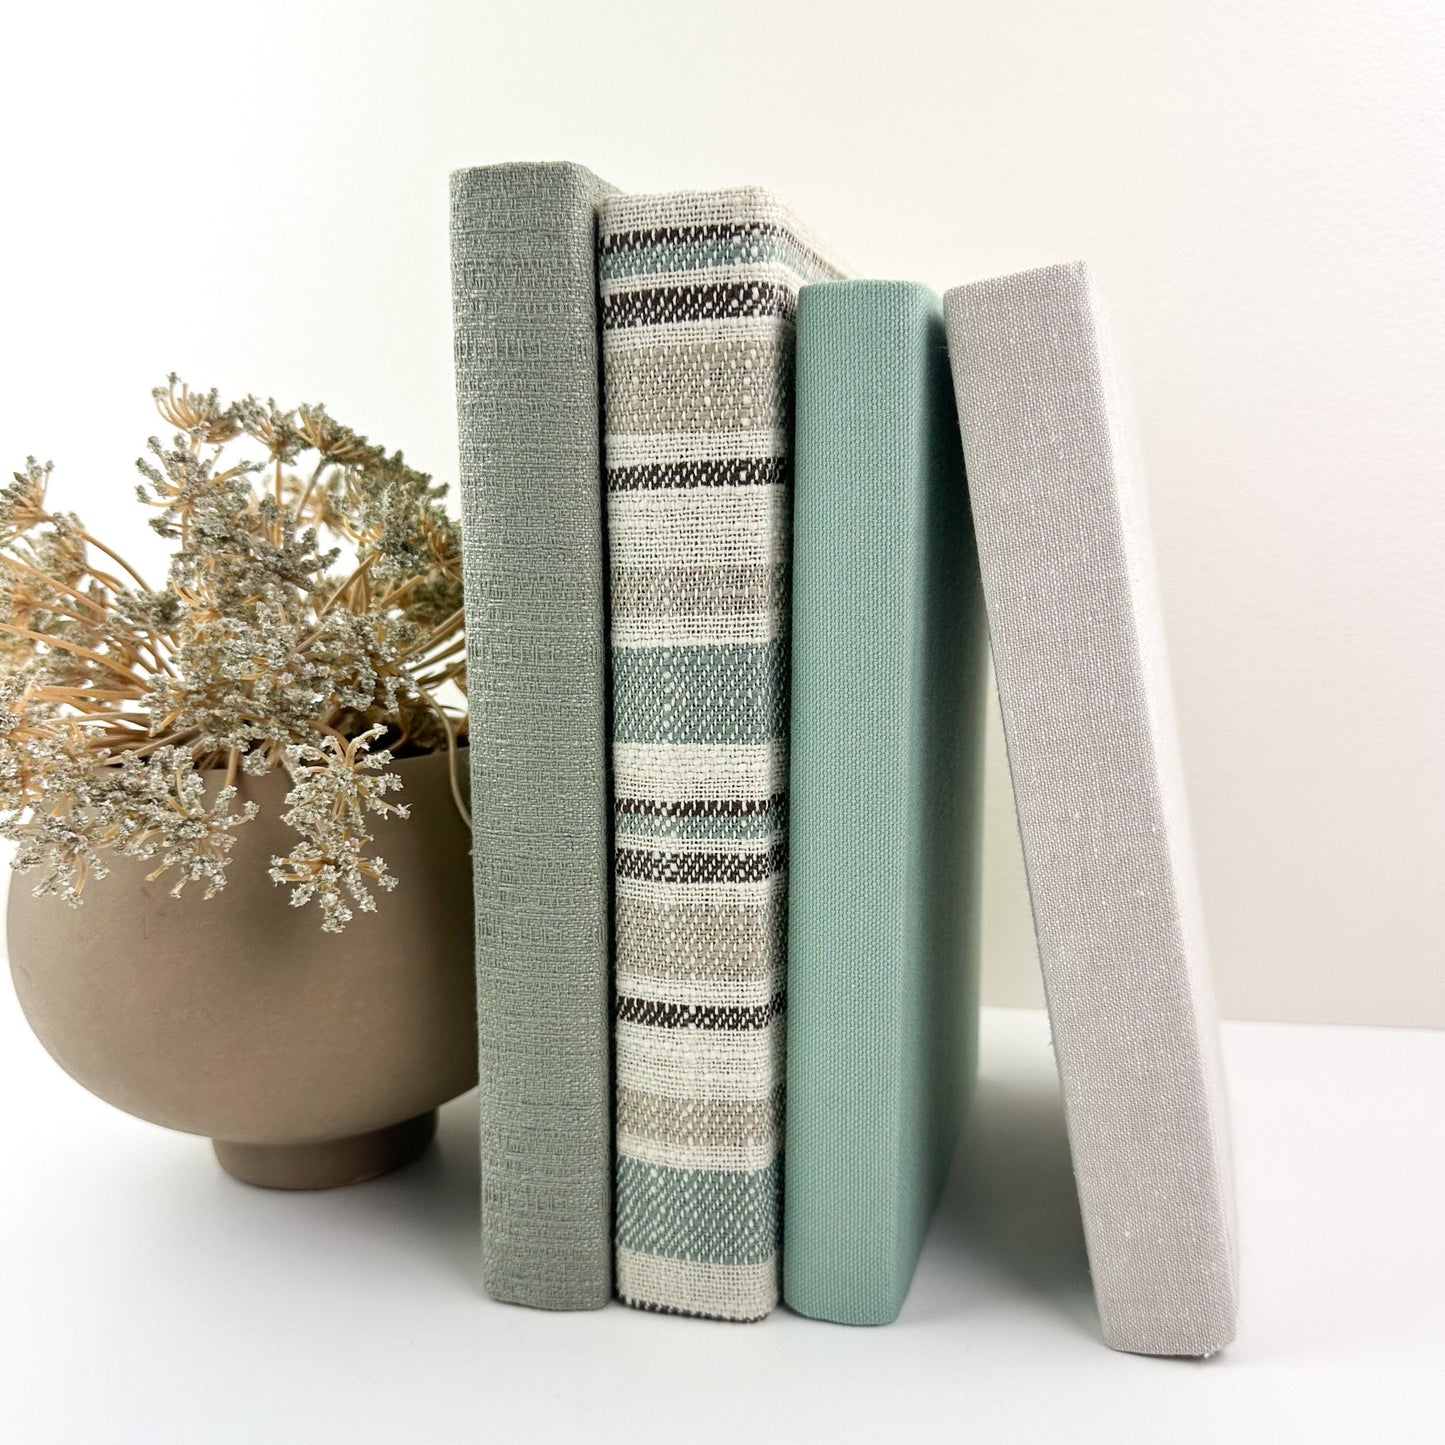 Mint Fabric Covered Book Set